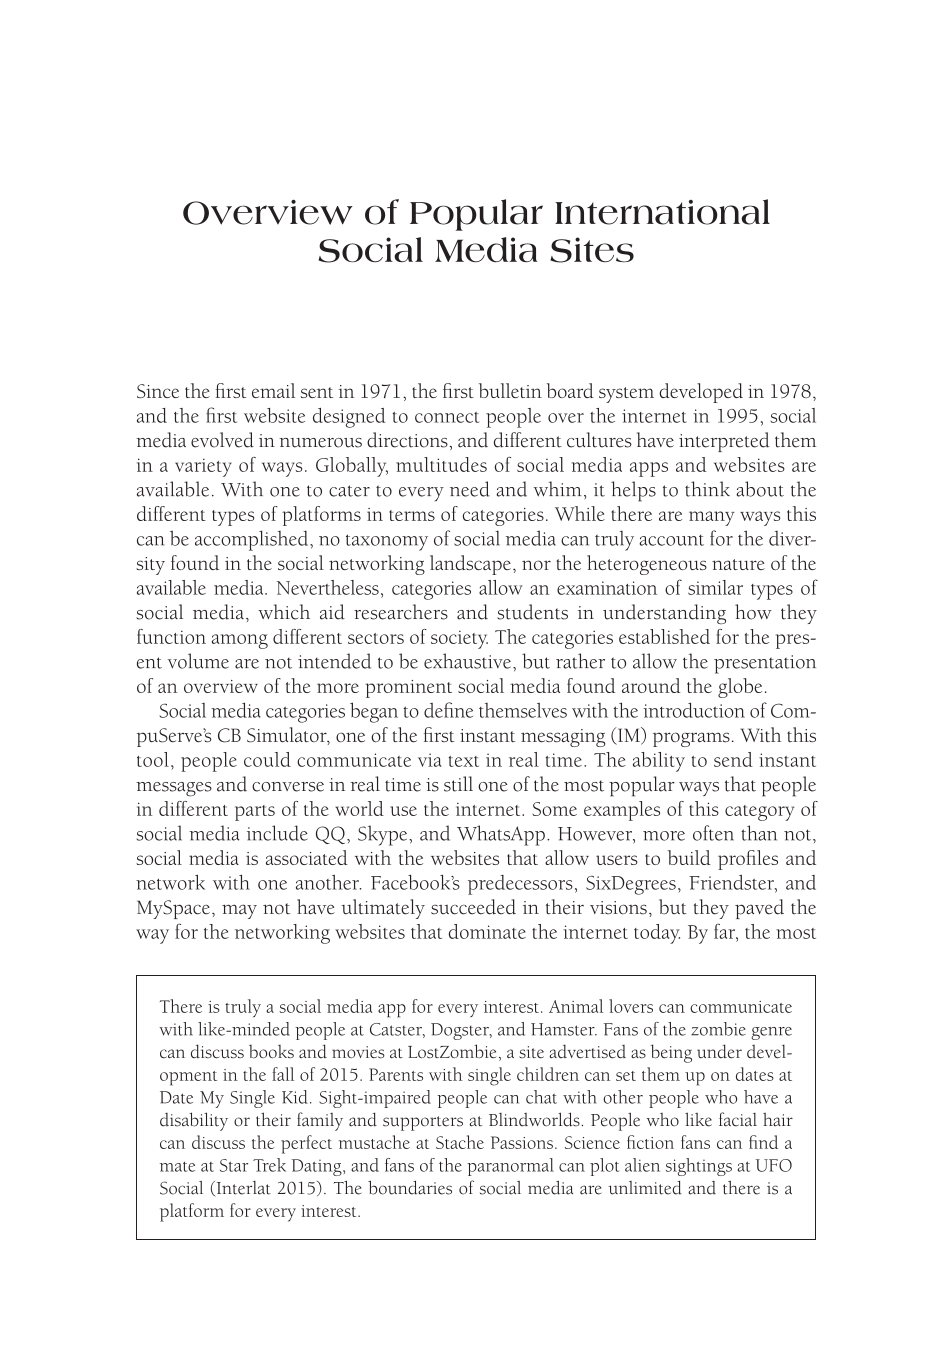 Online around the World: A Geographic Encyclopedia of the Internet, Social Media, and Mobile Apps page xxiii